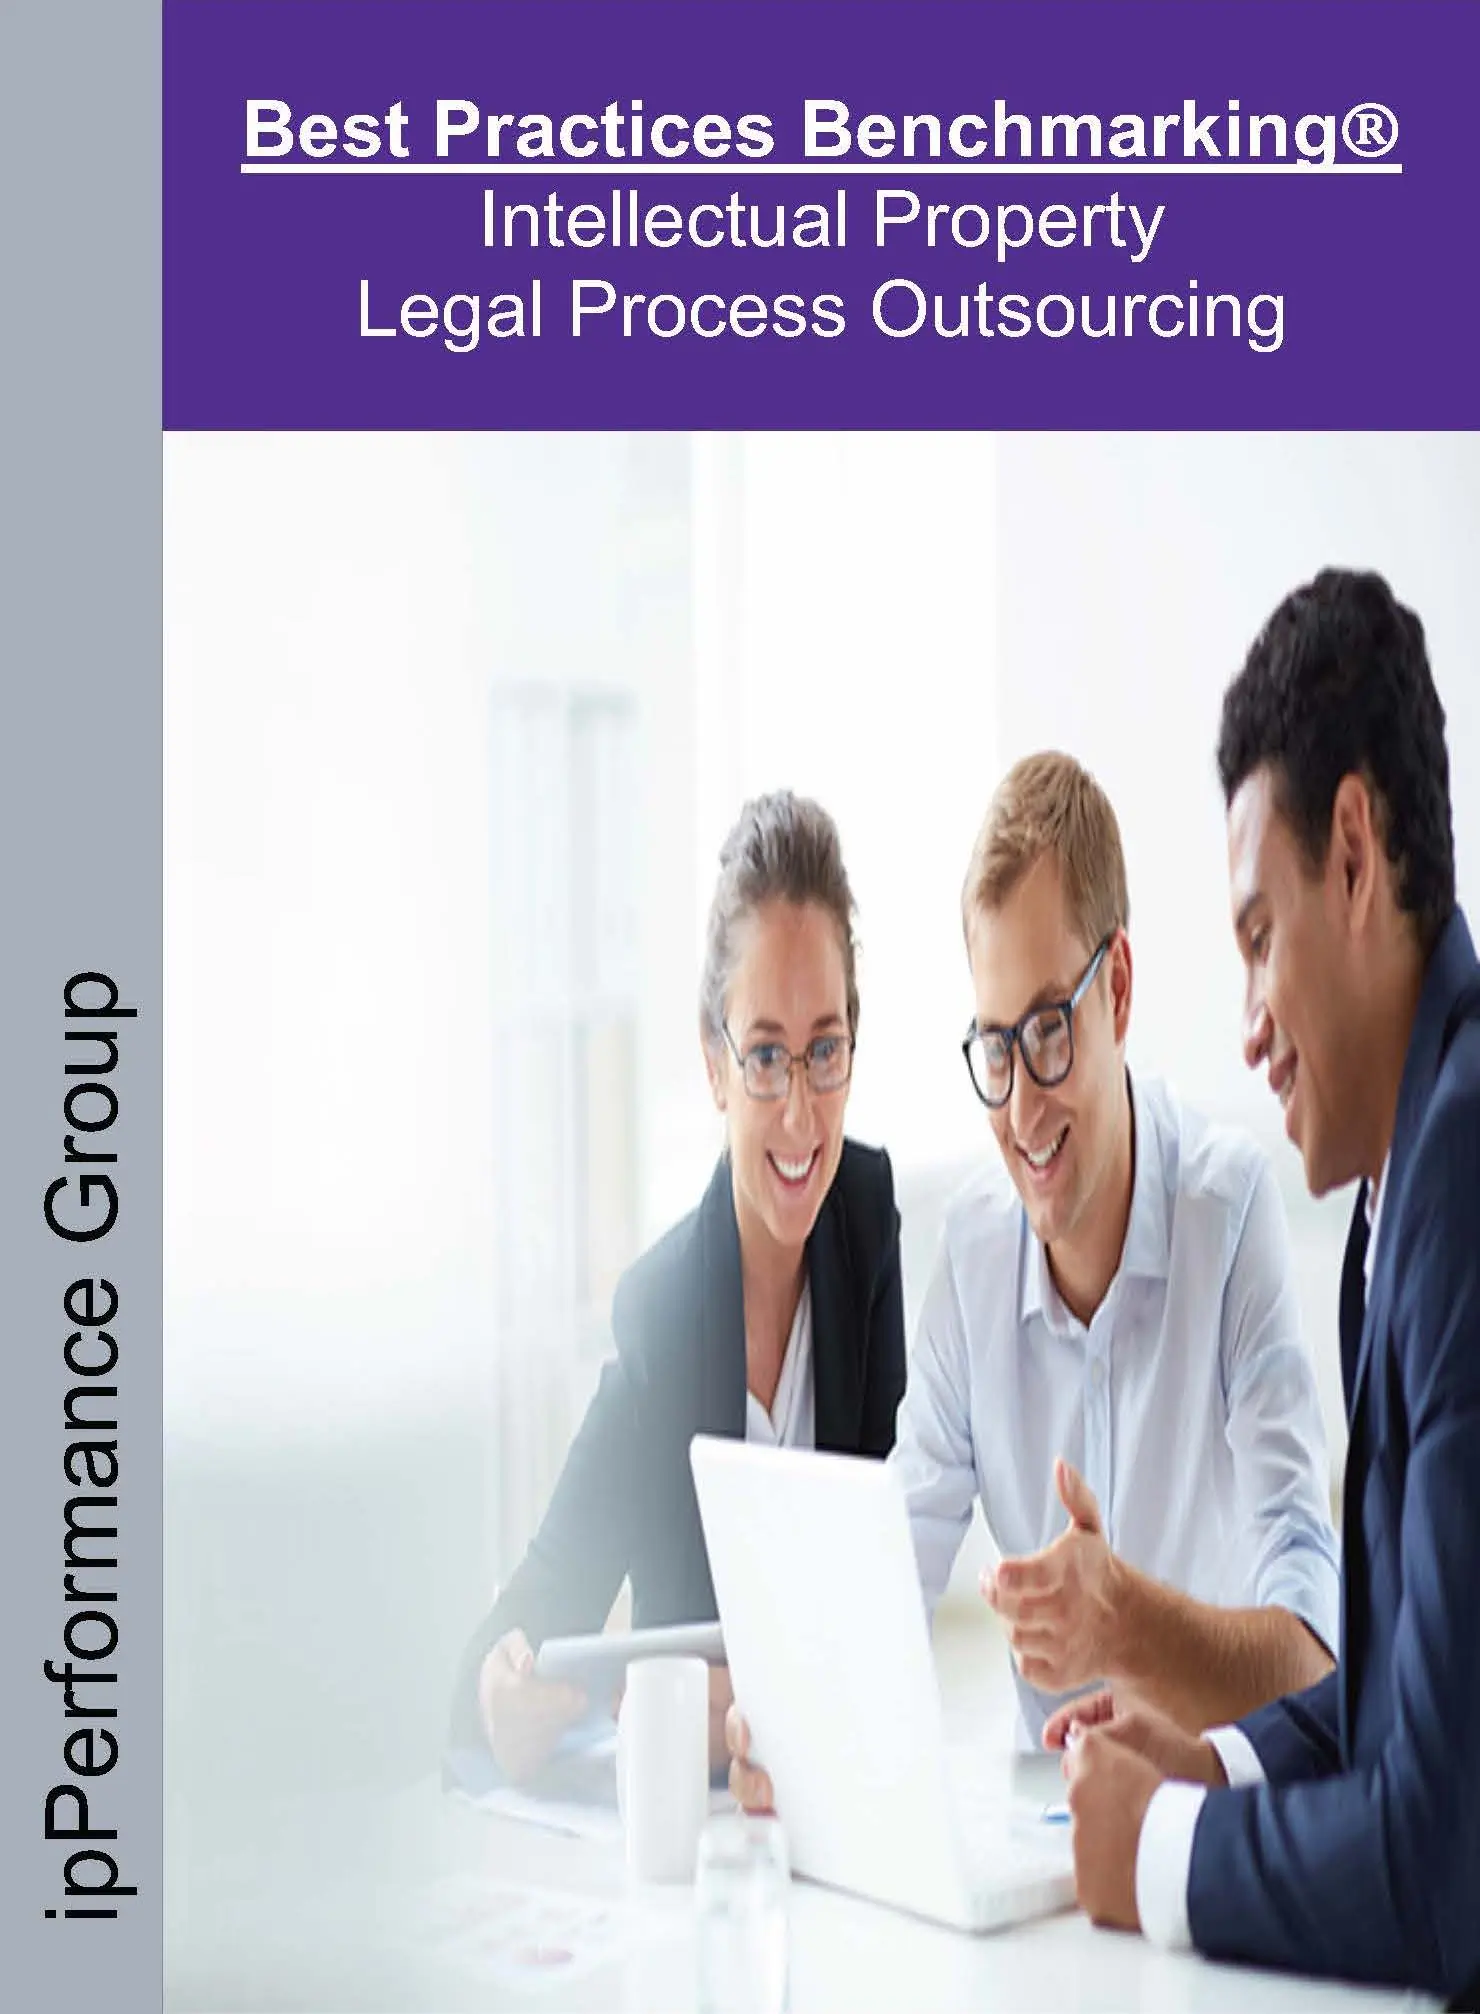 Intellectual-Property-Legal-Process-Outsourcing-Report